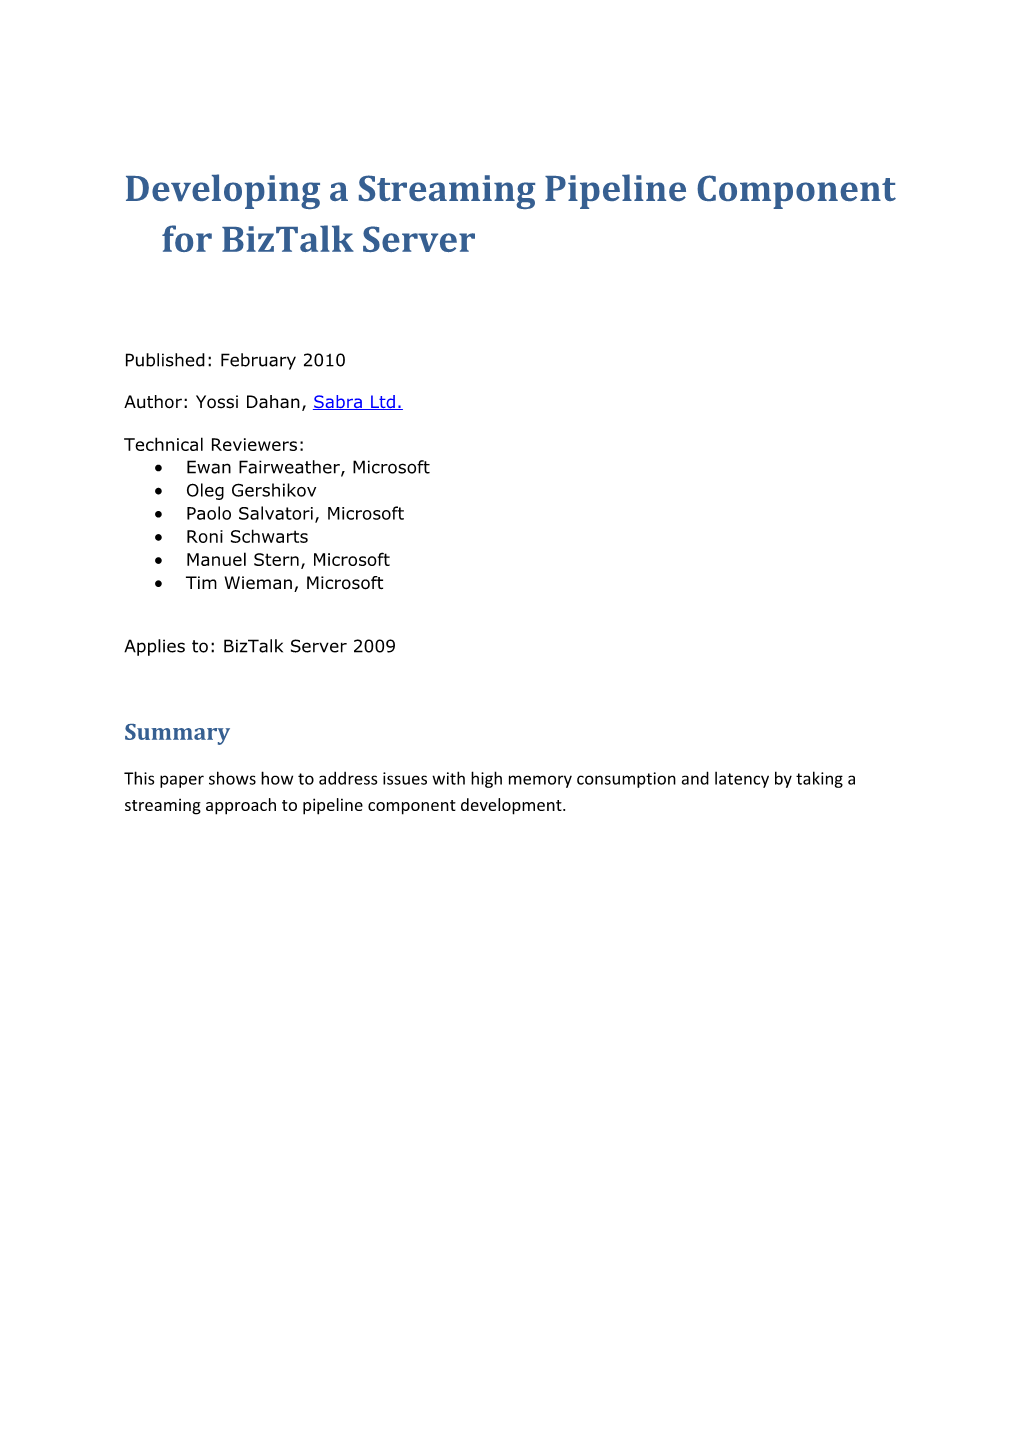 Developing a Streaming Pipeline Component for Biztalk Server